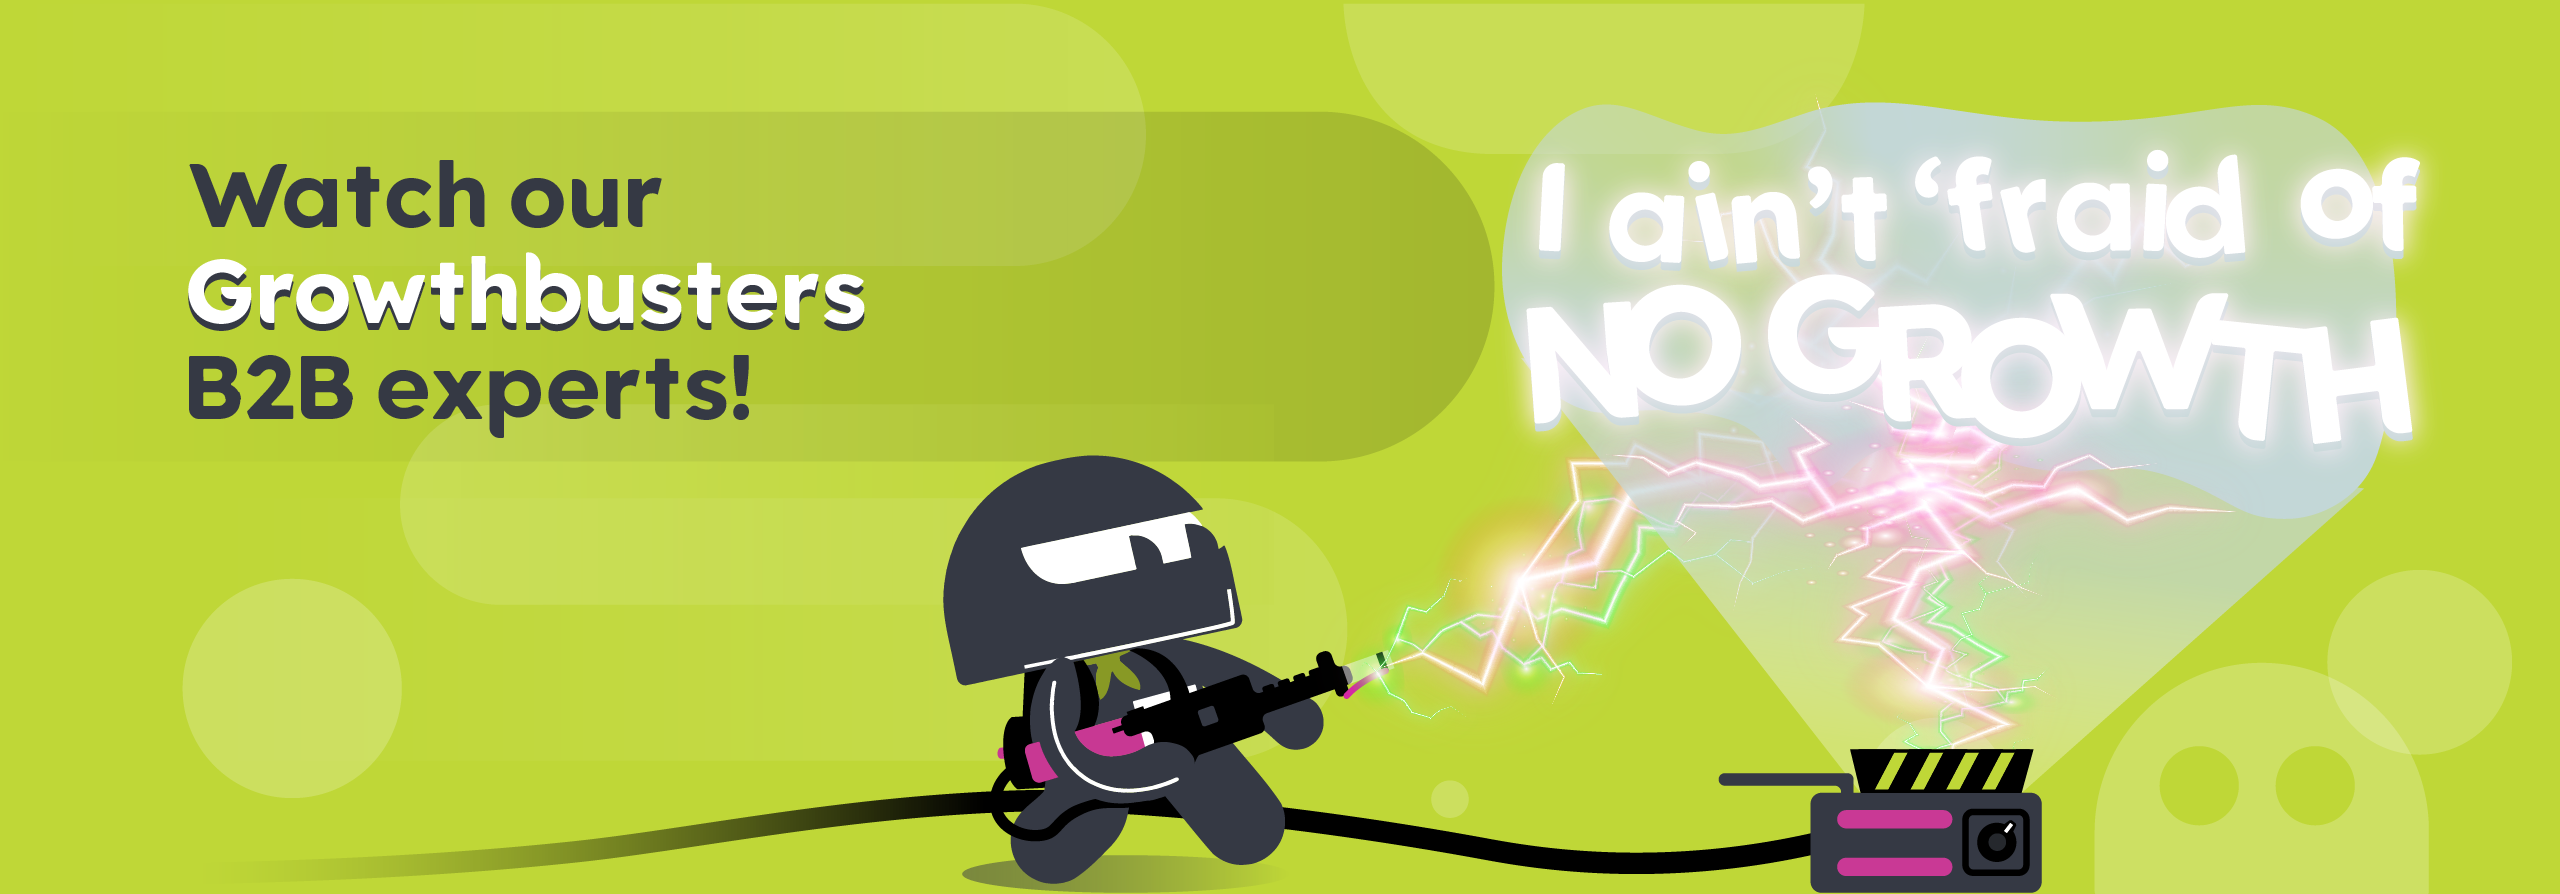 growthbusters_page_hero_hero_banner_2560x893